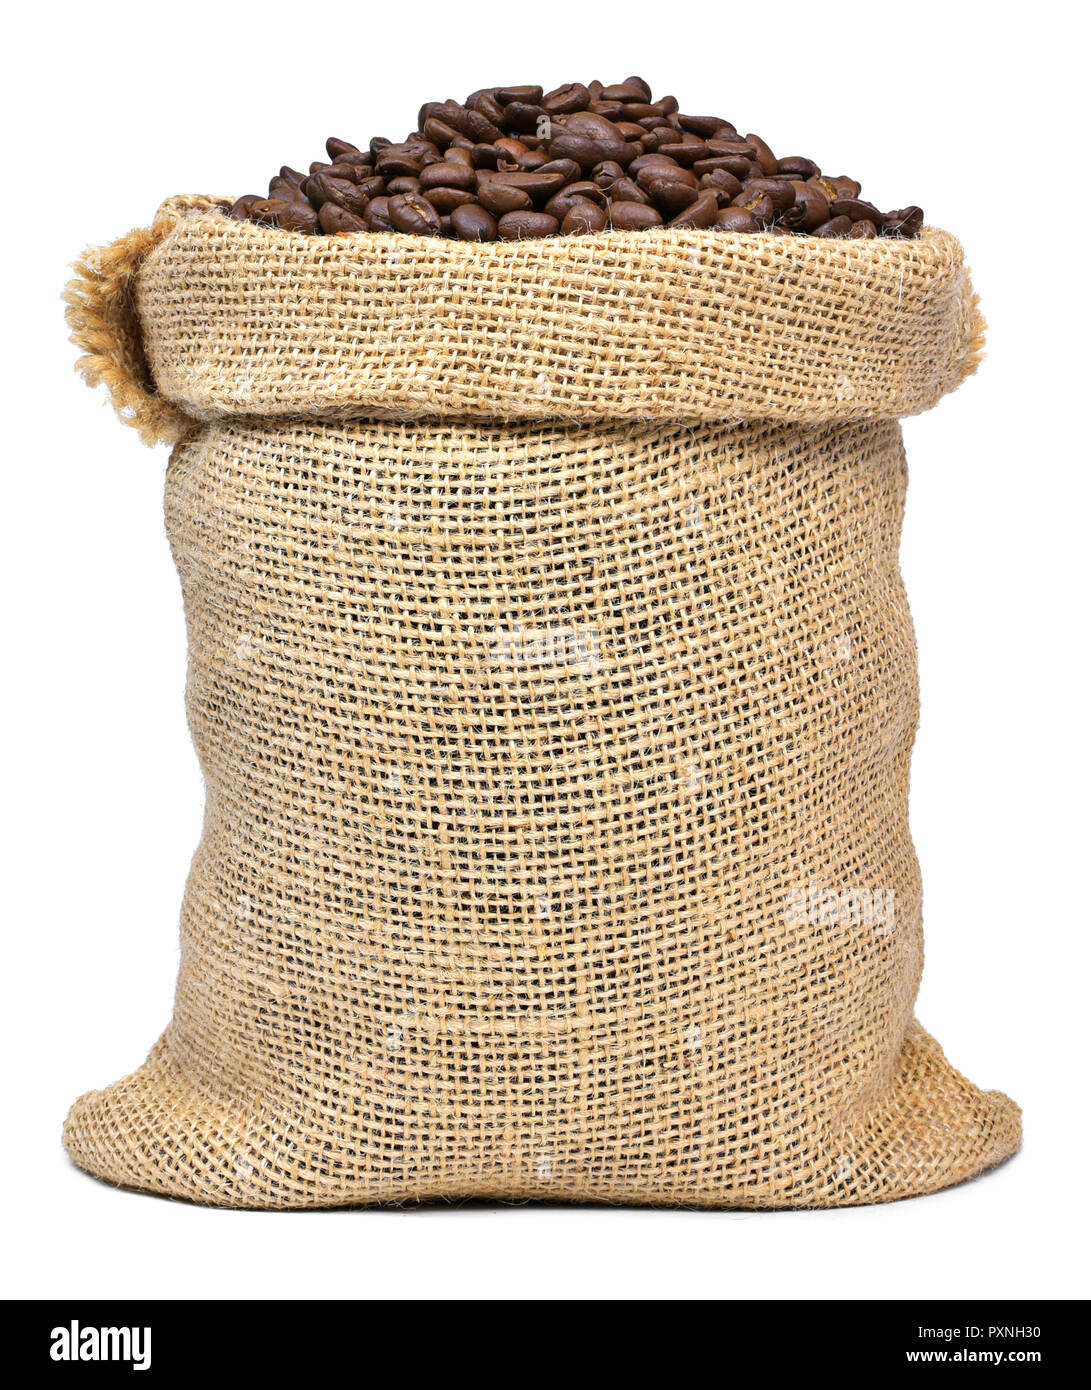 Roasted coffee beans in a burlap sack. Sackcloth bag with coffee beans, isolated on white background. Coffee export. Stock Photo